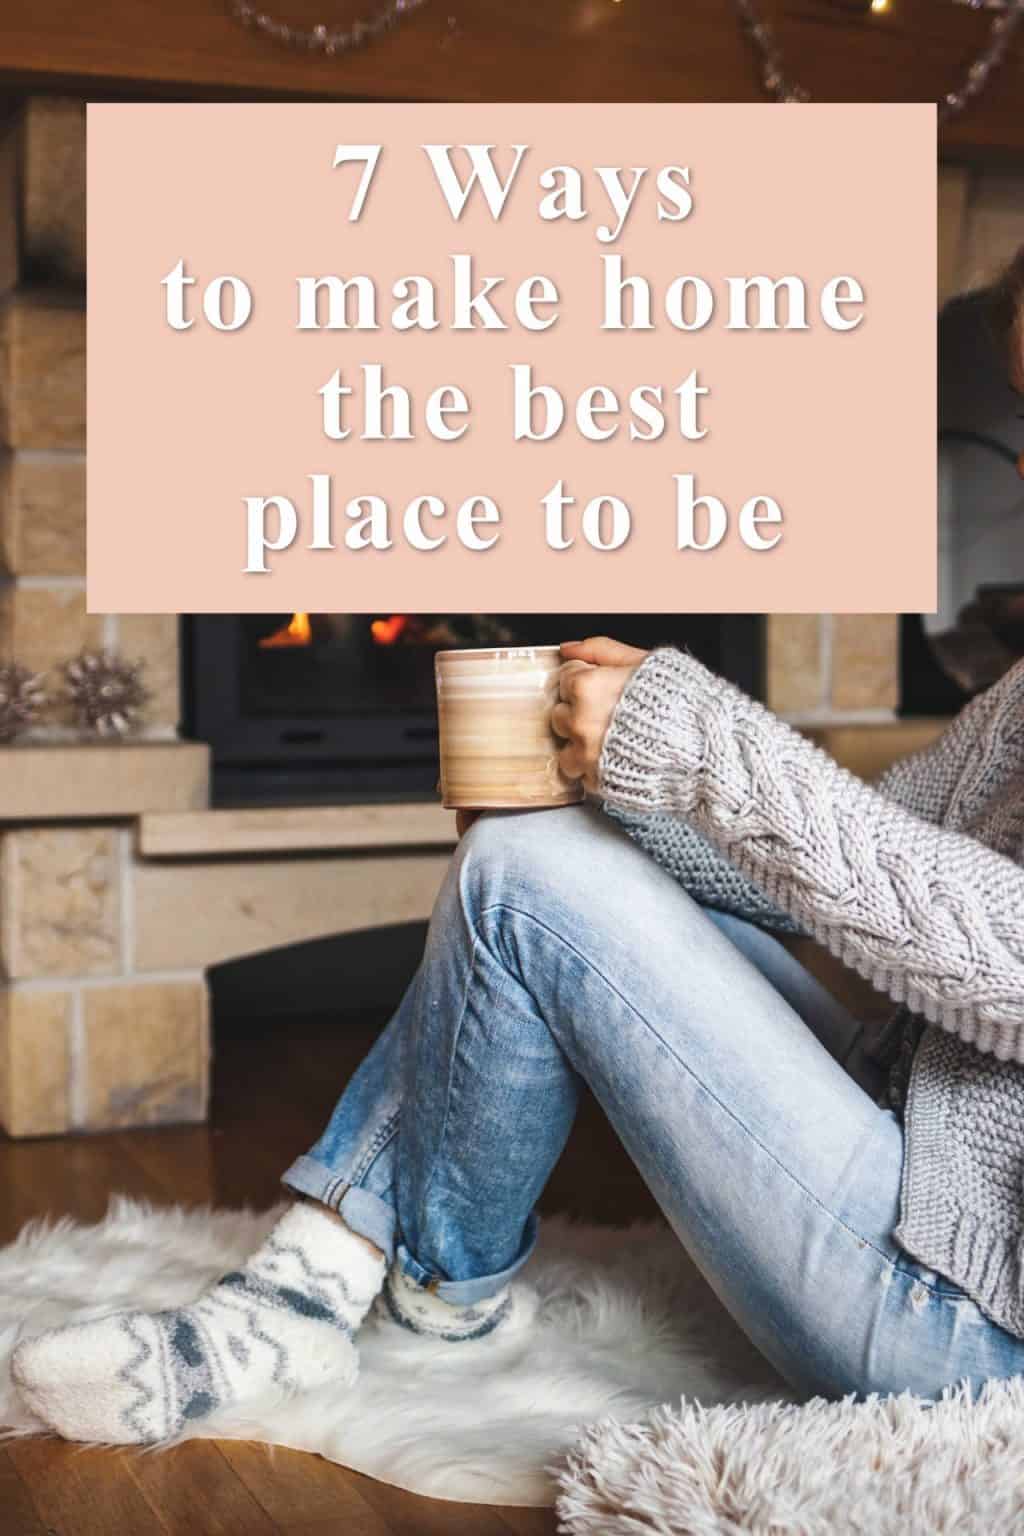 7 Ways to Make Home the Best place to be - At Home With The Barkers